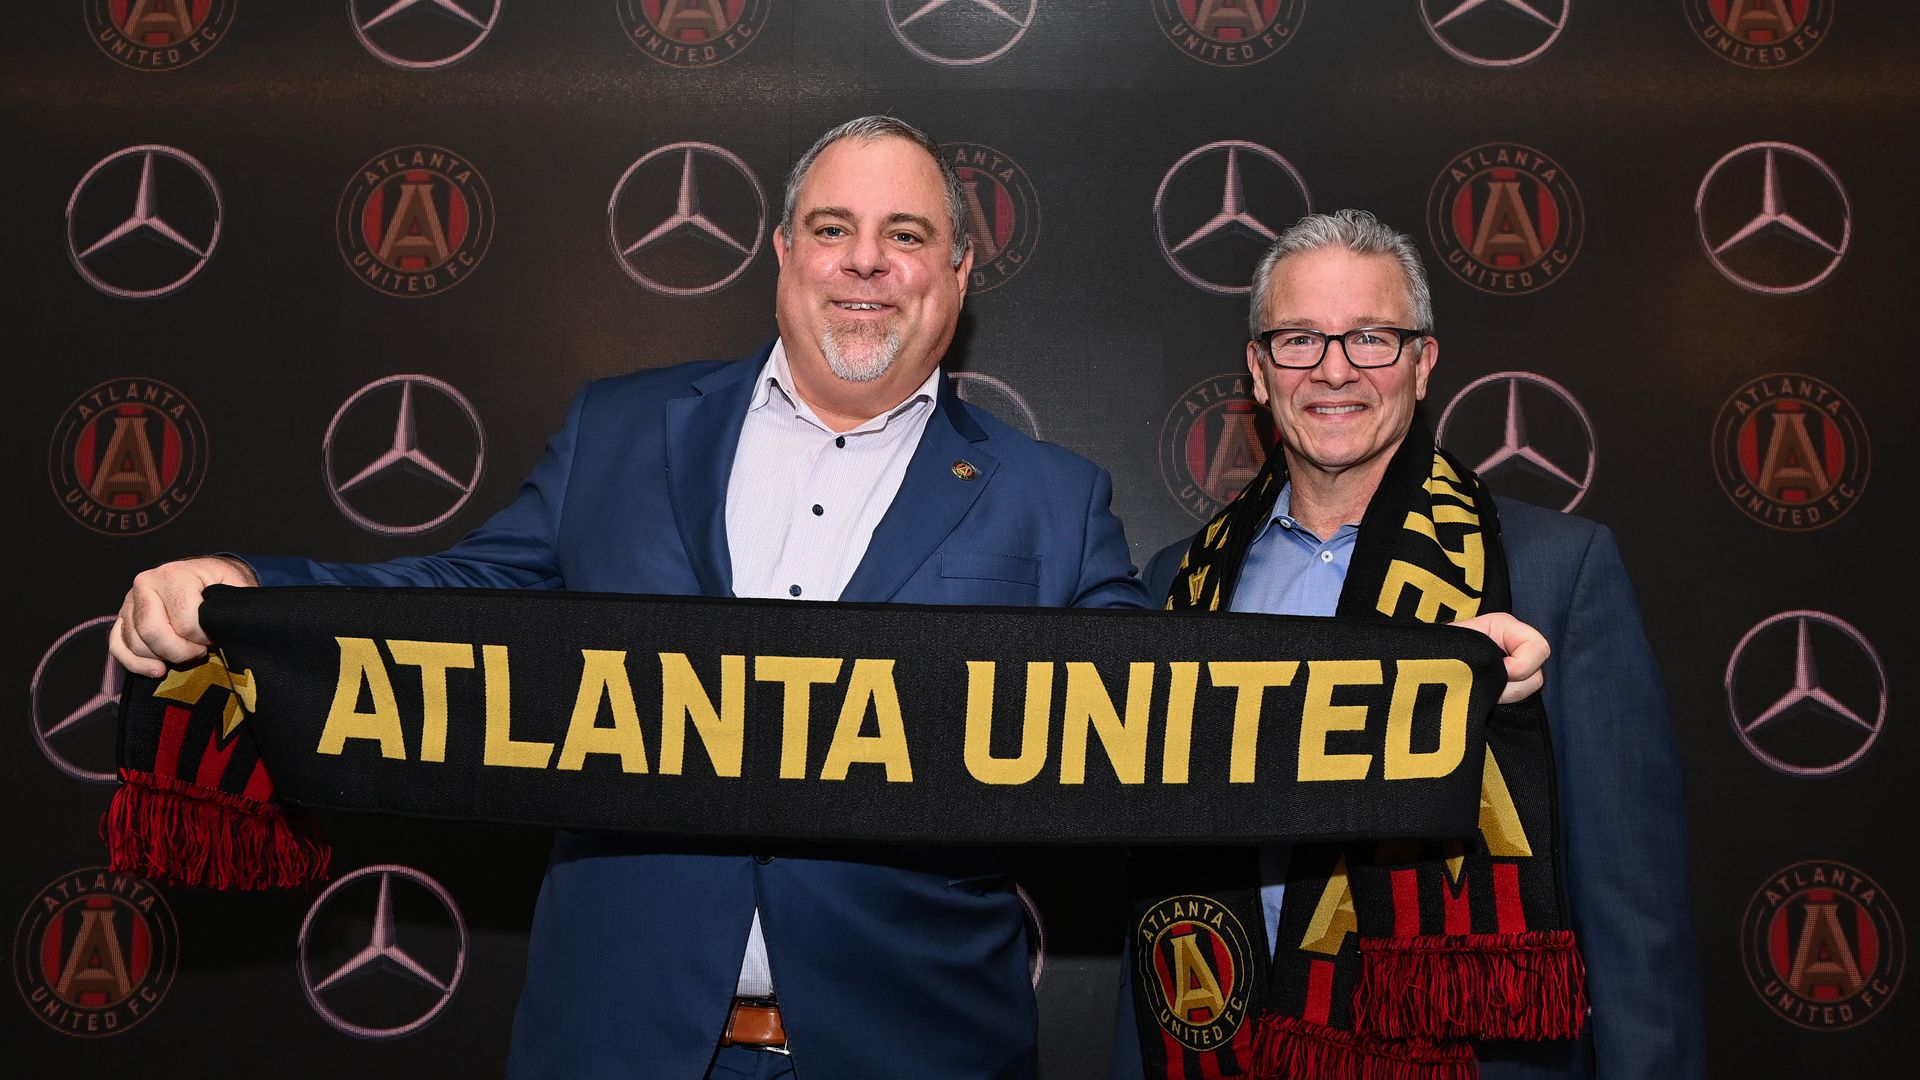 A man in a suit poses with another man while he holds a scarf that says "Atlanta United" 